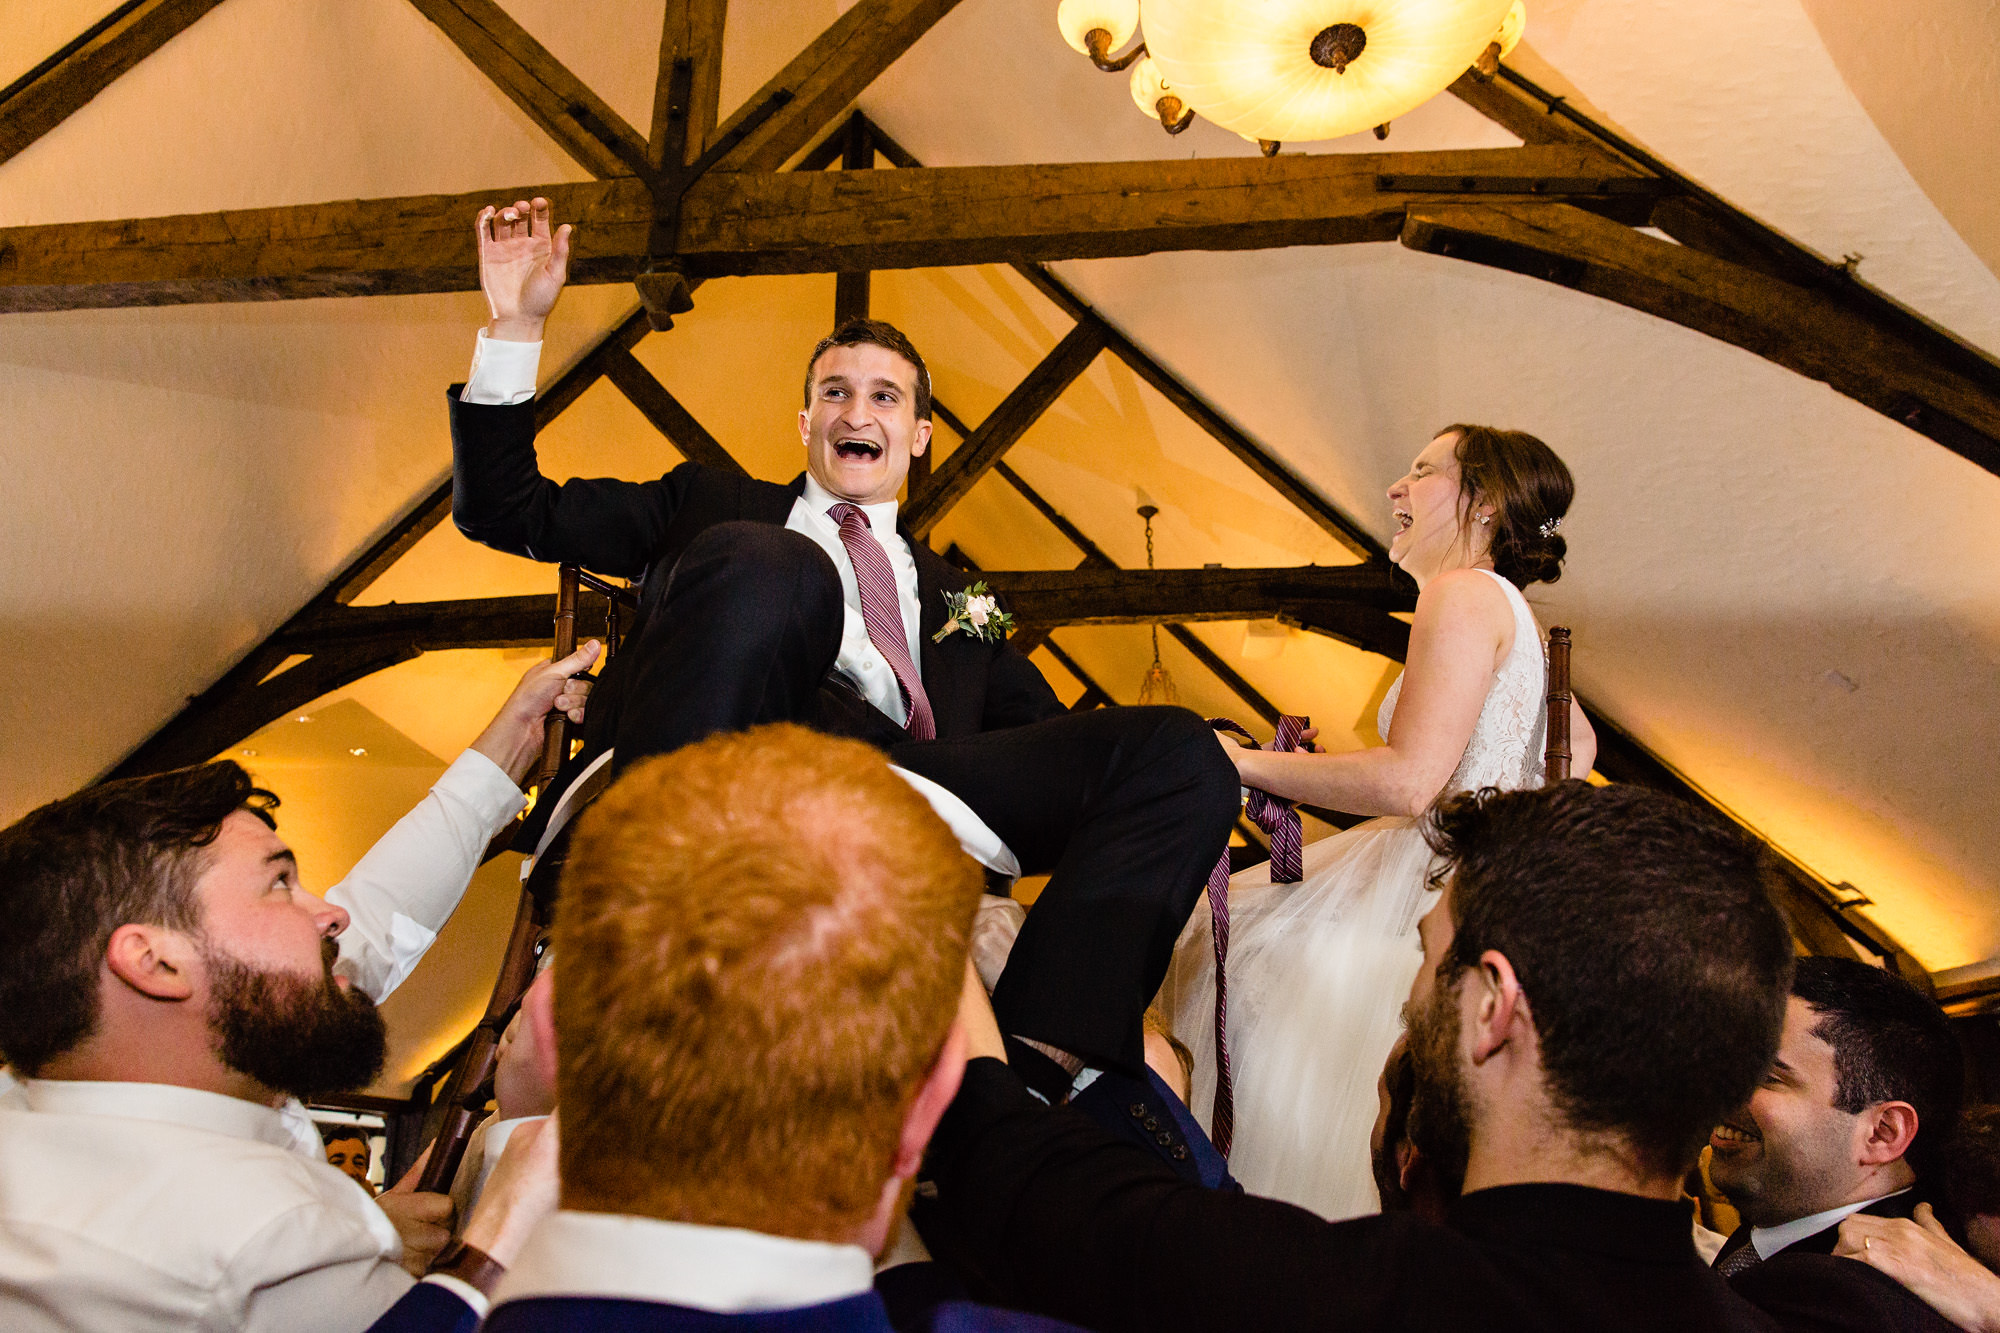 The chair dance at a MDI wedding in Maine